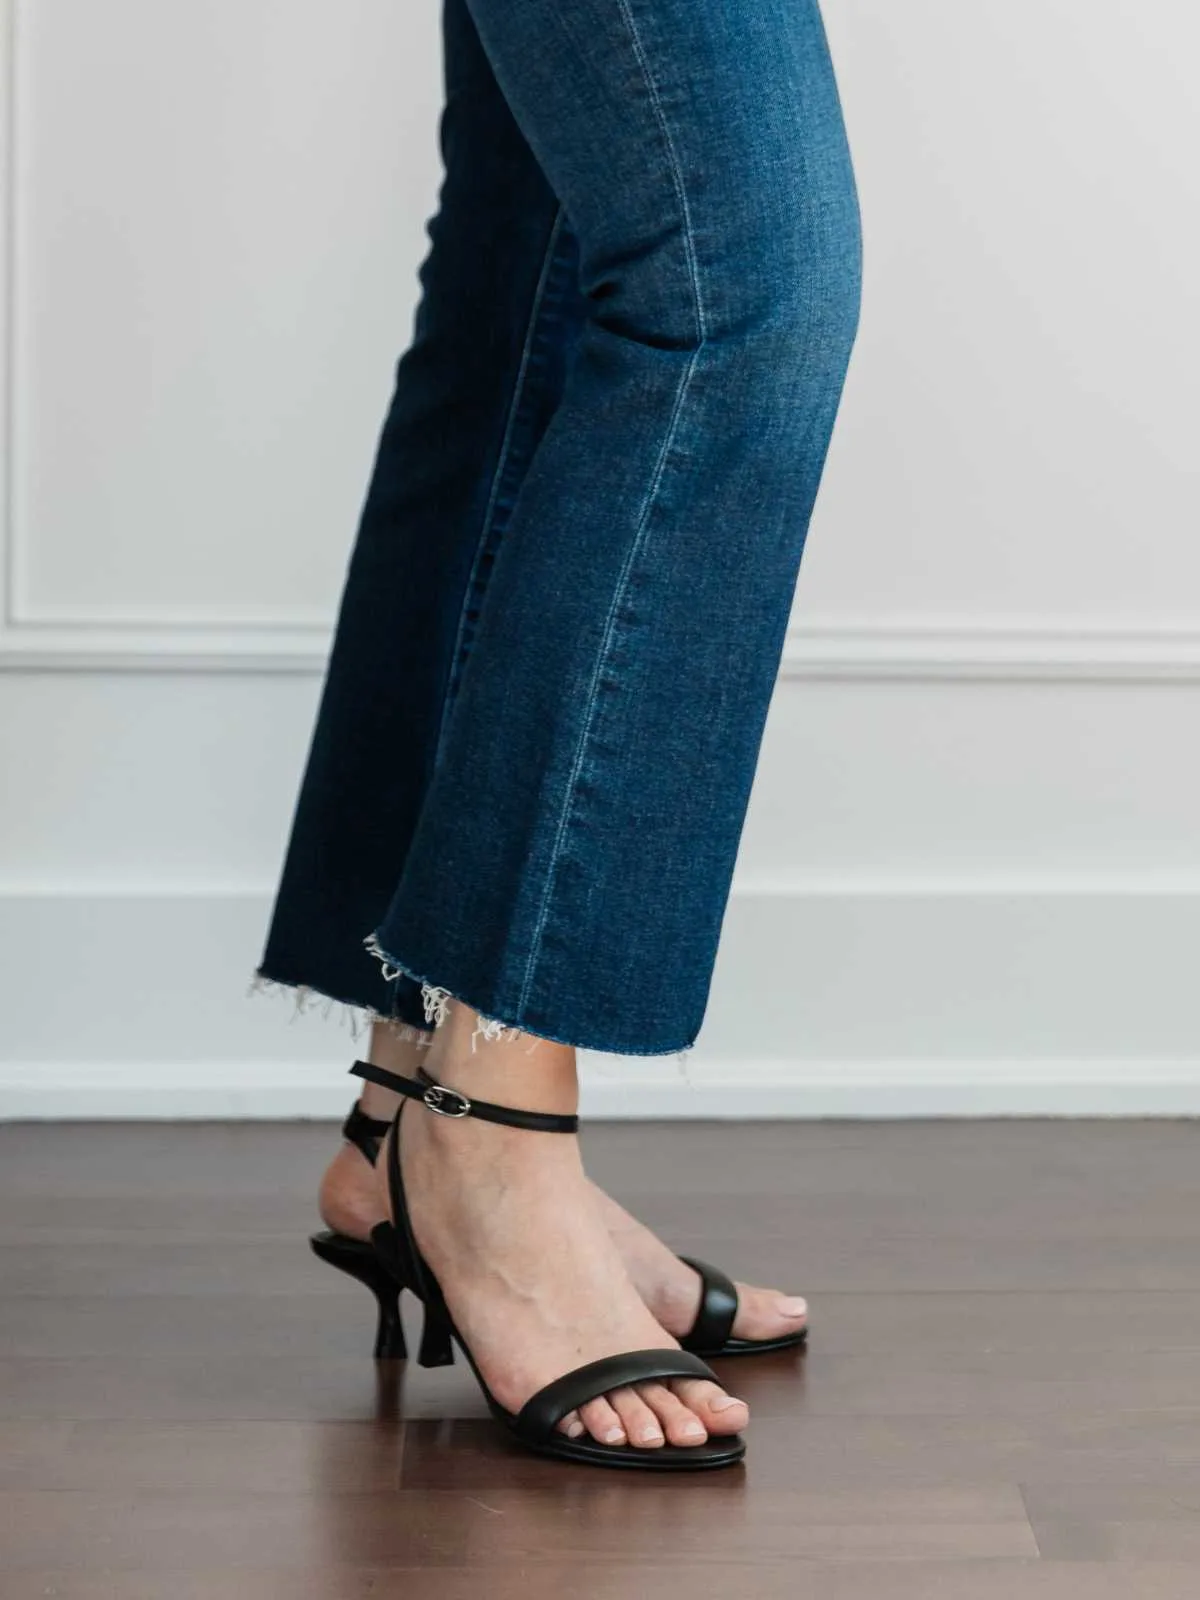 Cropped view of woman's legs wearing  kitten heel sandals with kick flares